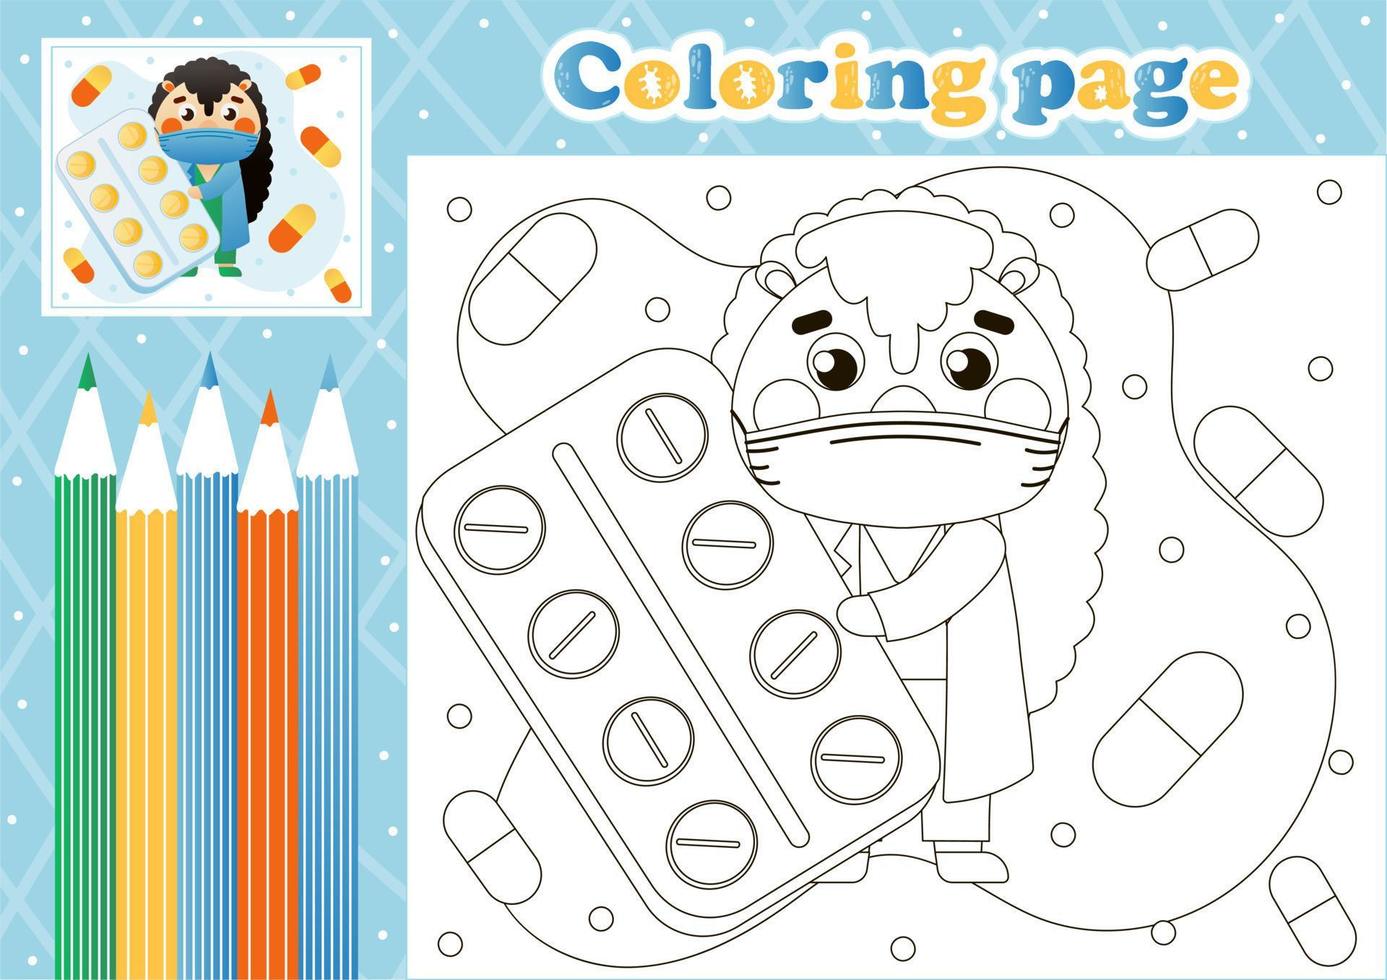 Medical coloring page for kids with cute hedgehog doctor with pills vector